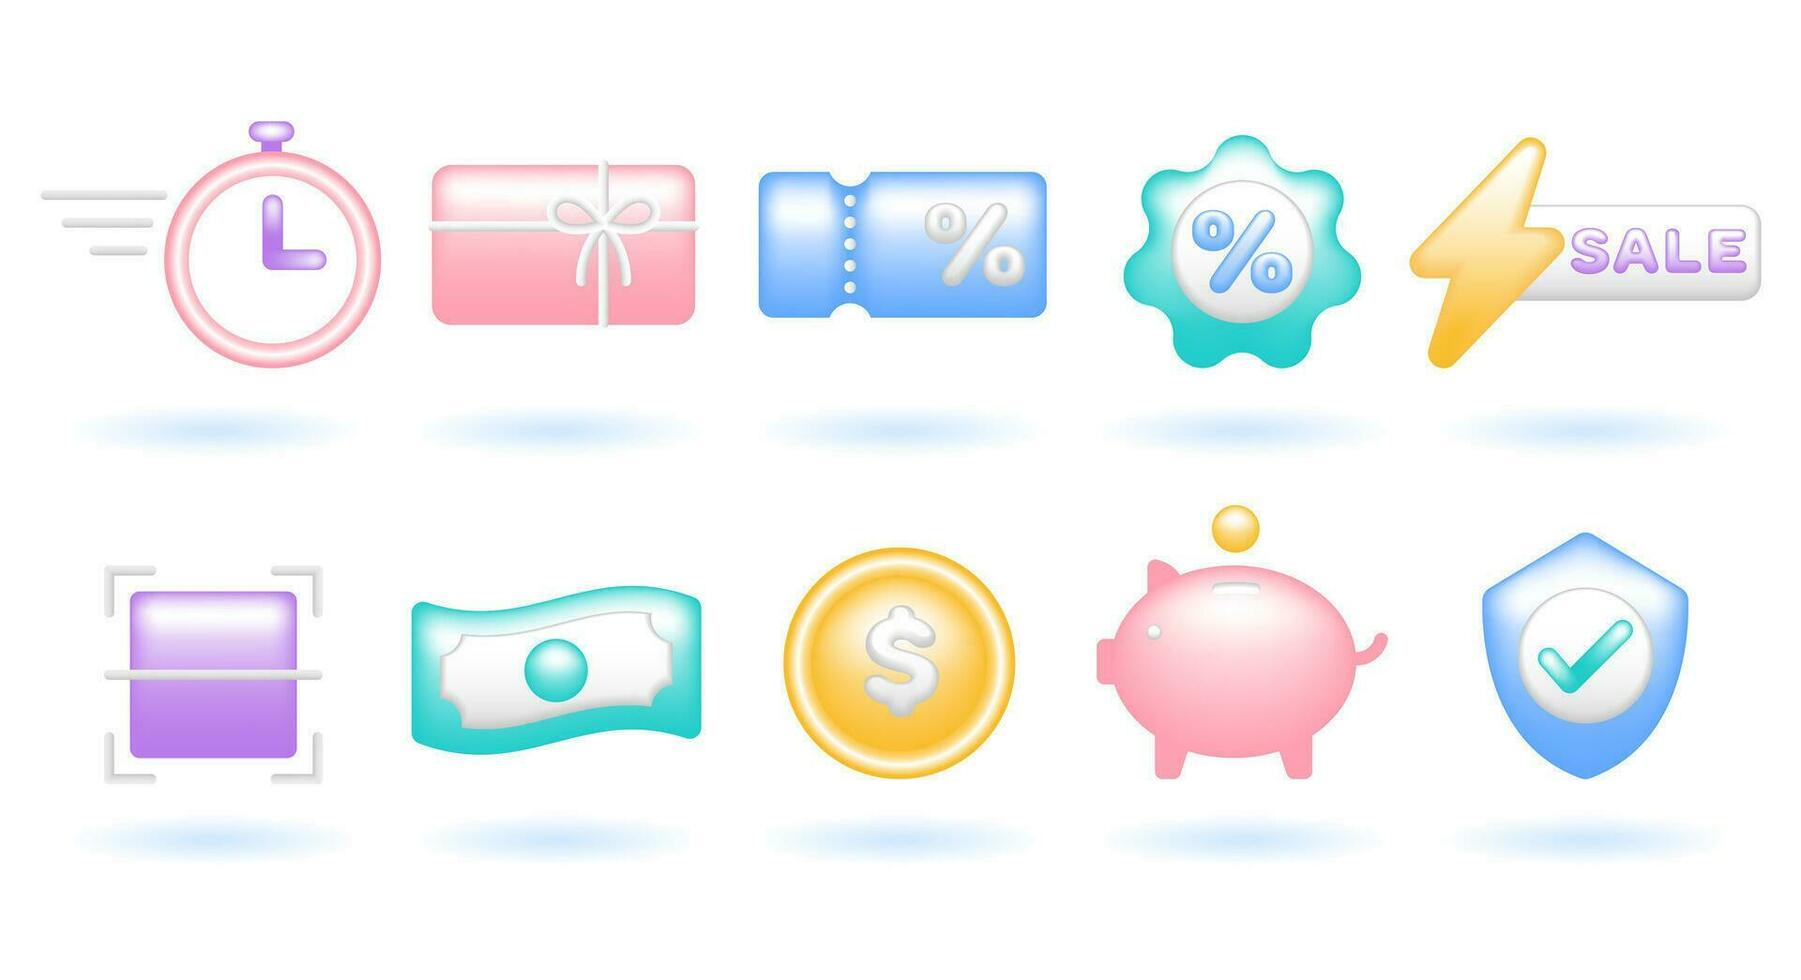 3D Icon Set of Shopping Promotion Concept. Stopwatch, Gift Card, Voucher, Flash Sale, Money Piggy Bank, Shield. Cute Realistic Cartoon Minimal Style. 3D Render Vector Icons UX UI Isolated Illustration